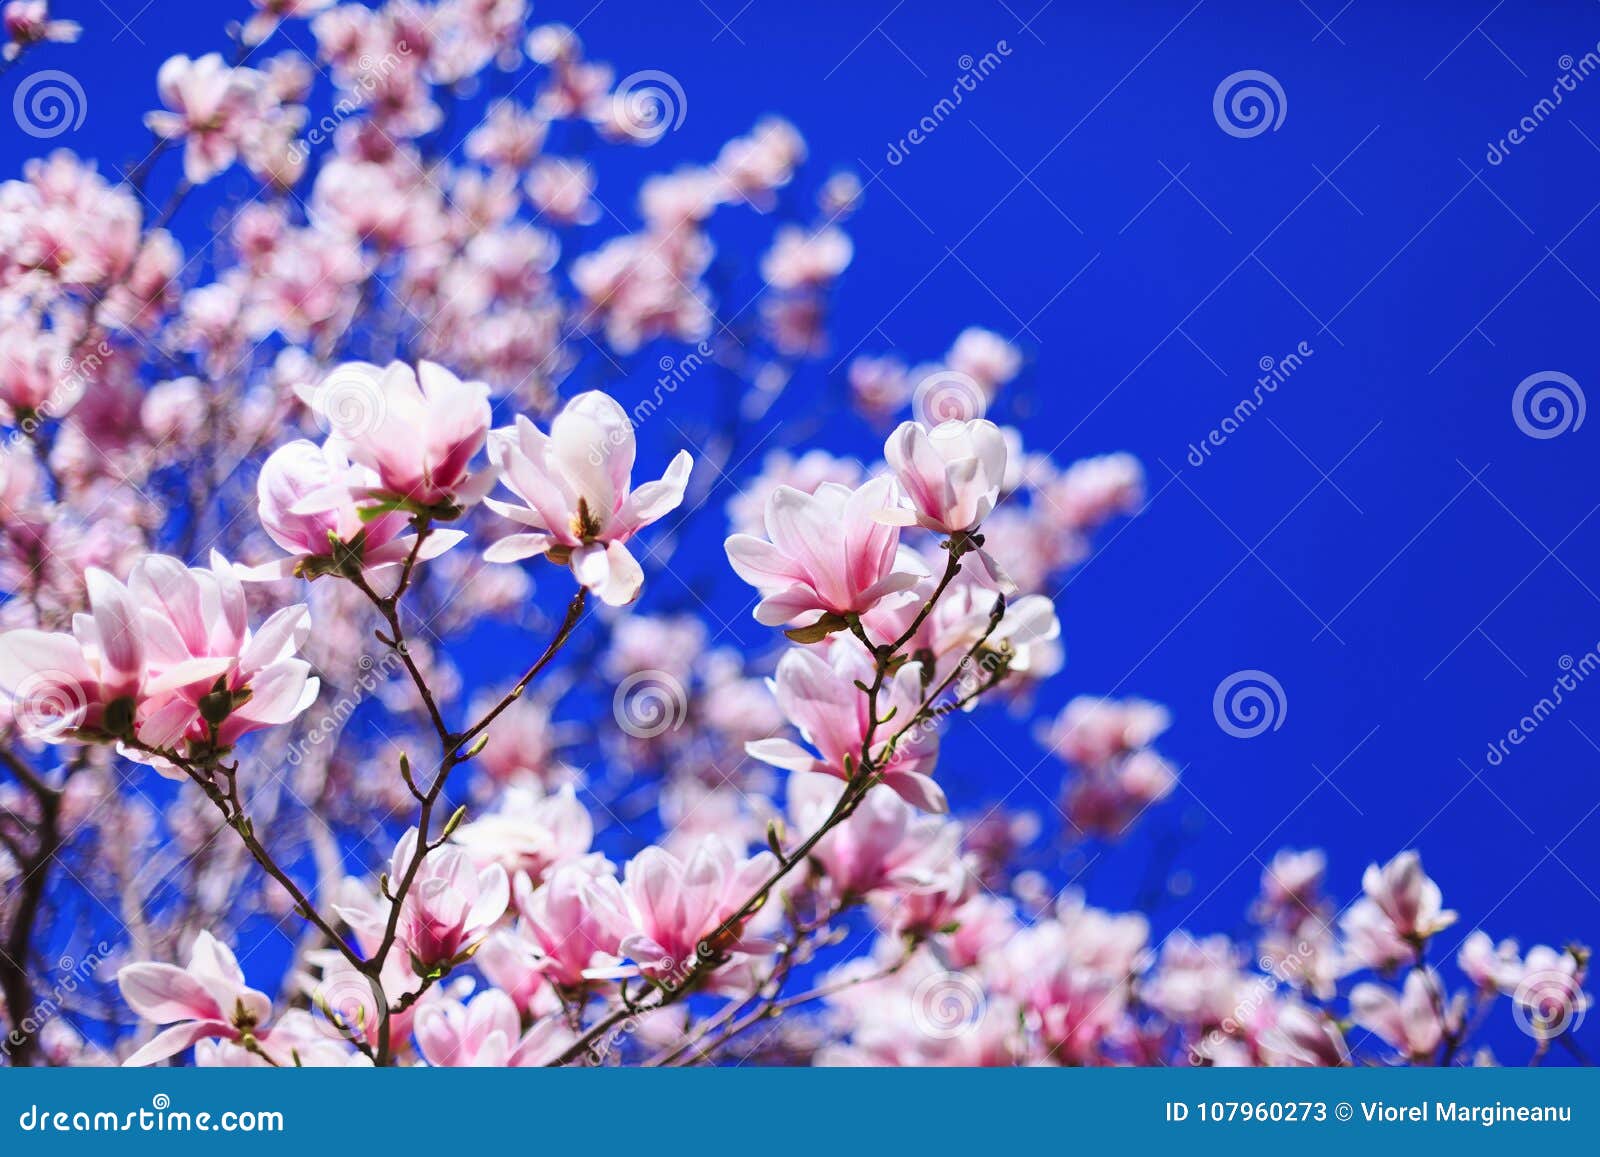 great texture of magnolia pink fowers on blue sky background. best for march 8 international womens or women day